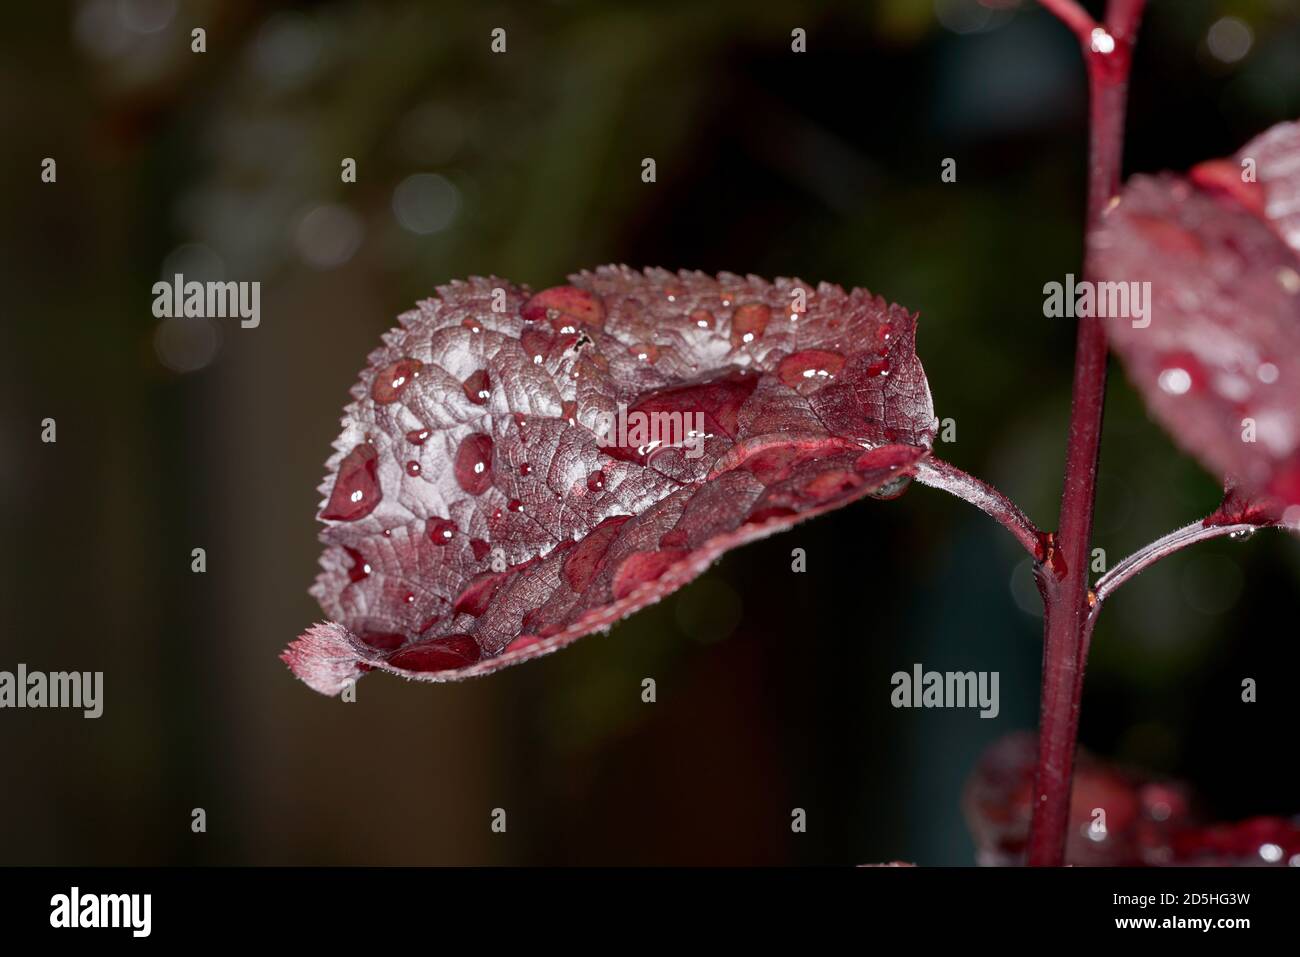 Closeup shot of the water droplets on the plant's red leaves Stock Photo